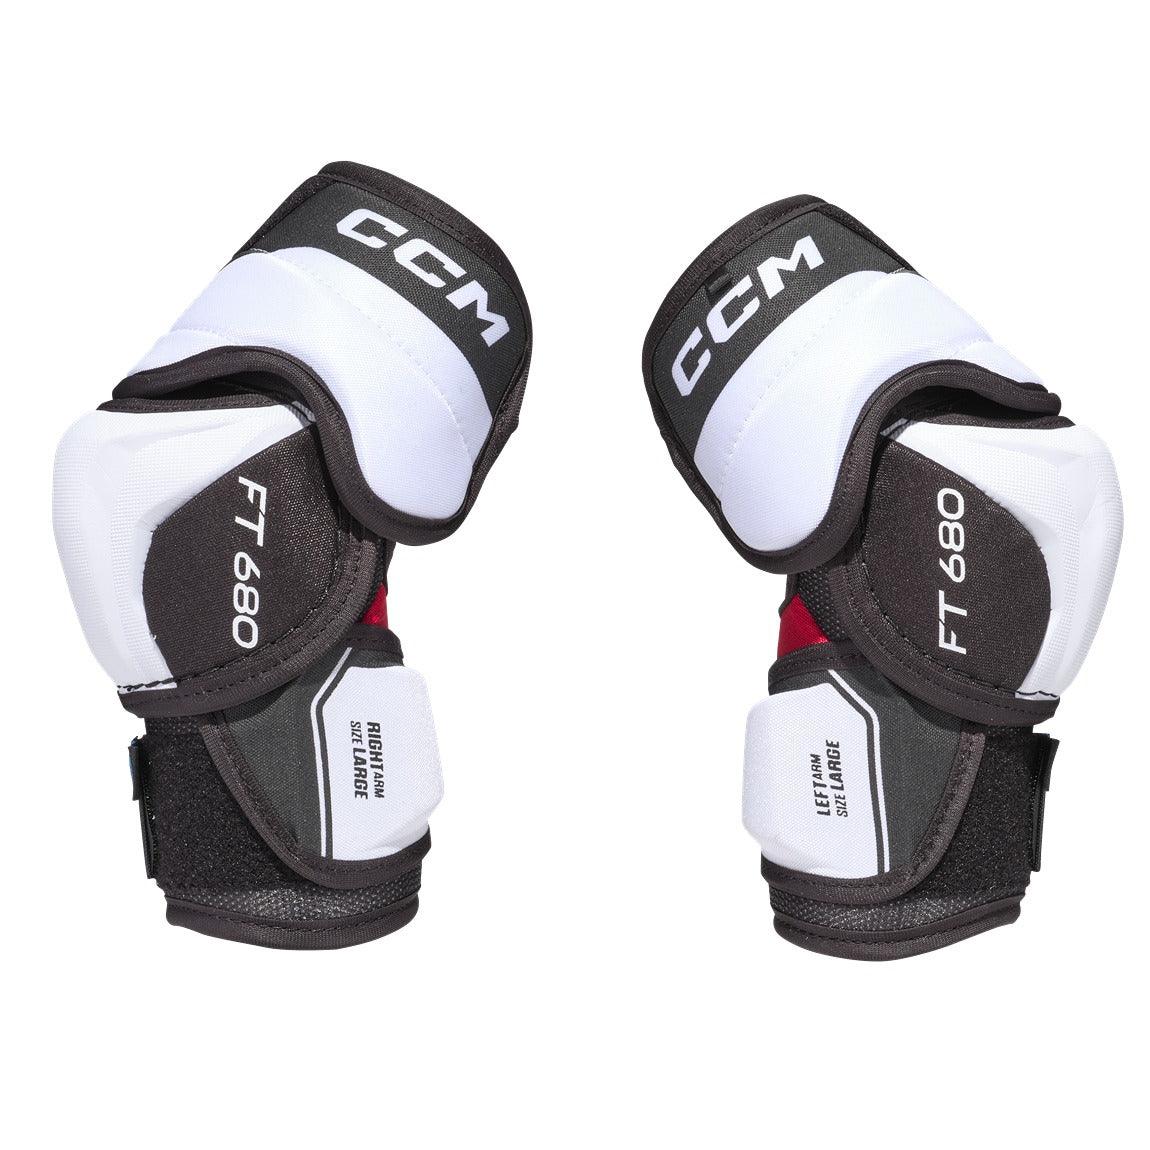 Jetspeed FT680 Elbow Pads - Senior - Sports Excellence